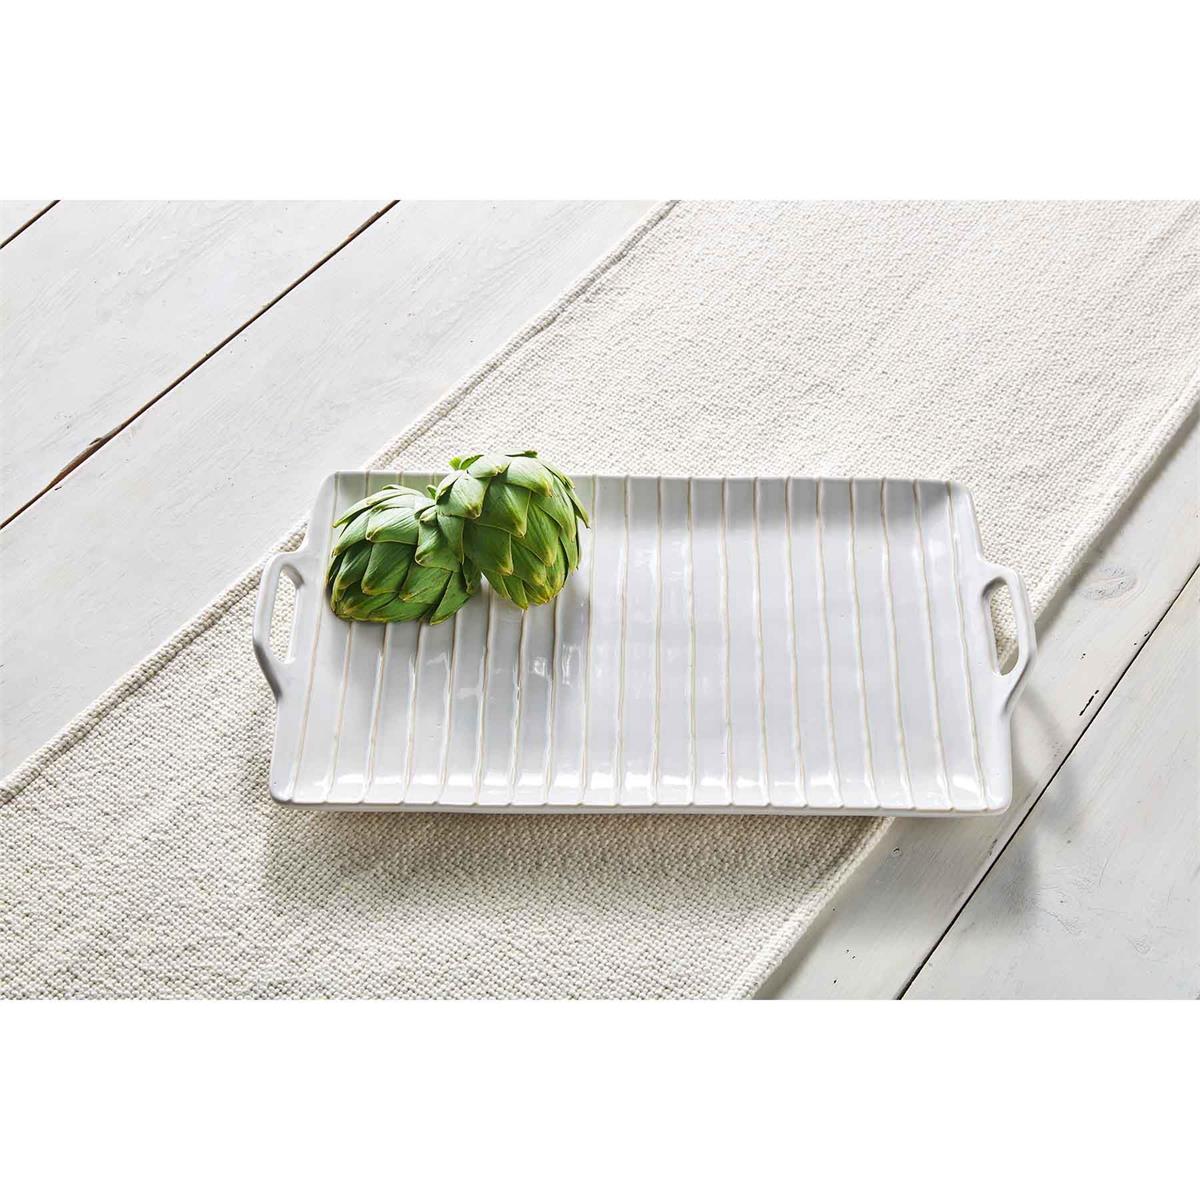 textured platter displayed with two artichokes on a white wood slat table